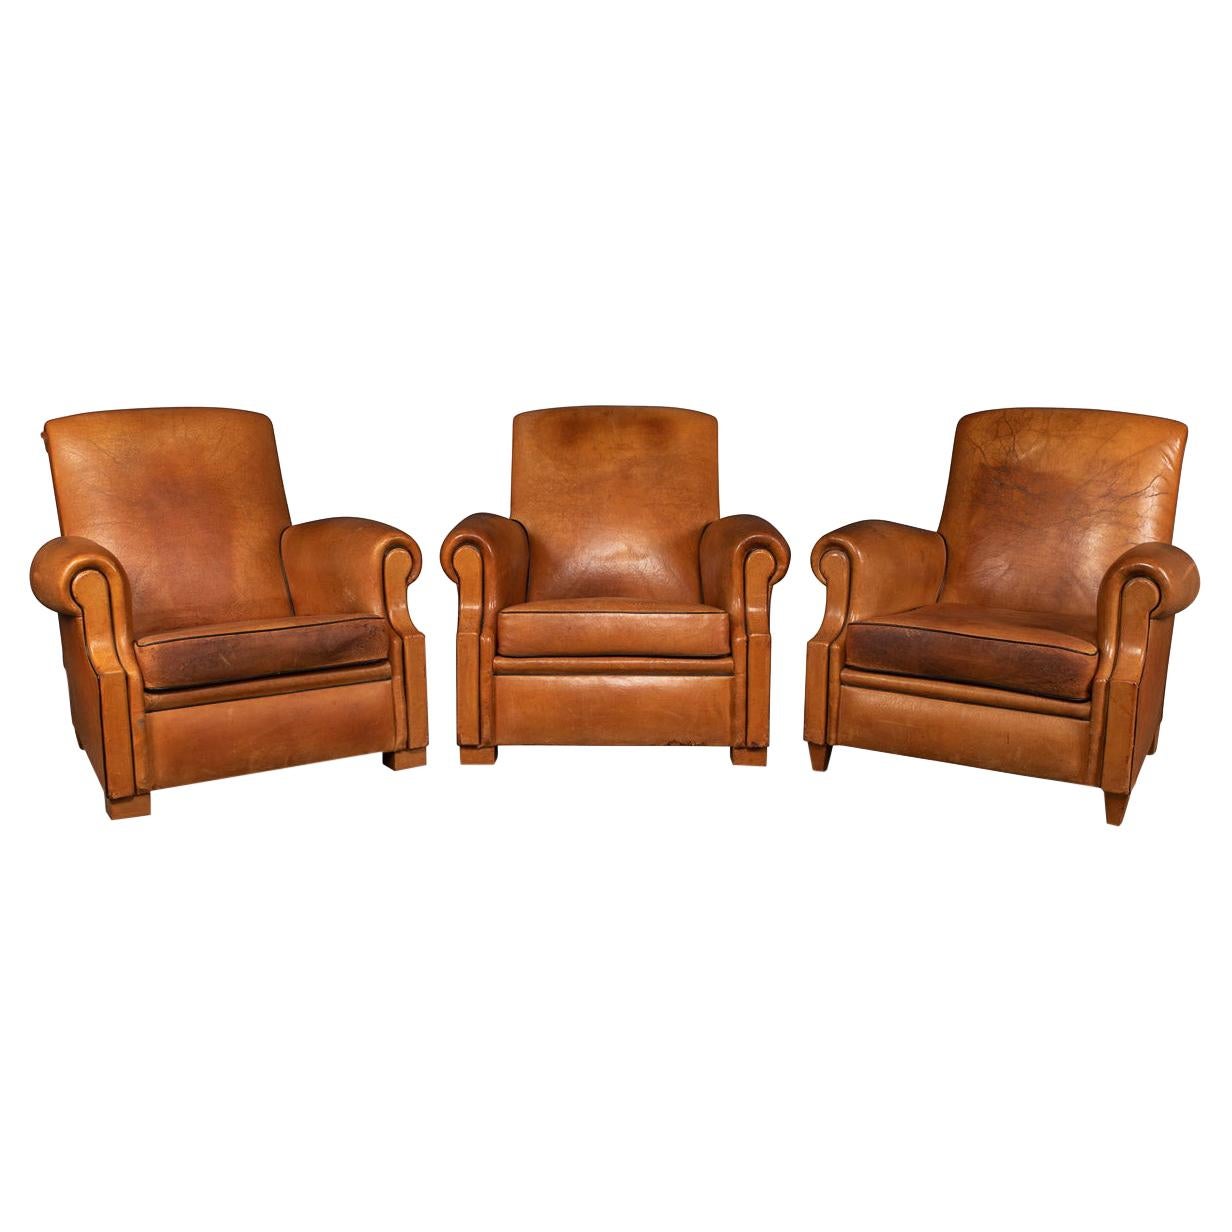 20th Century French Set Of Three Tan Leather Club Chairs, 1930s